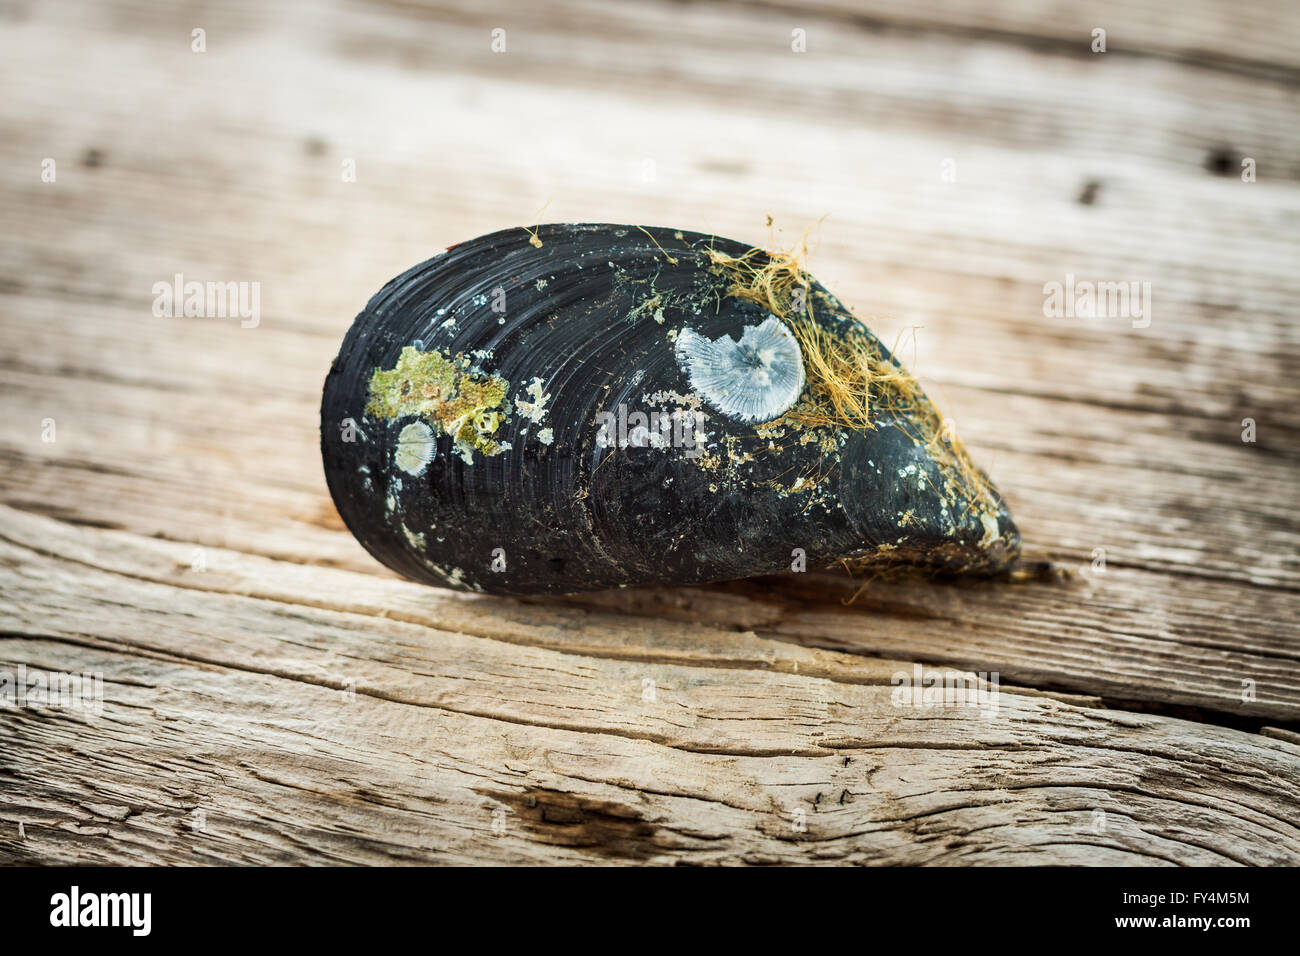 Raw mussel on old wooden table close up Stock Photo